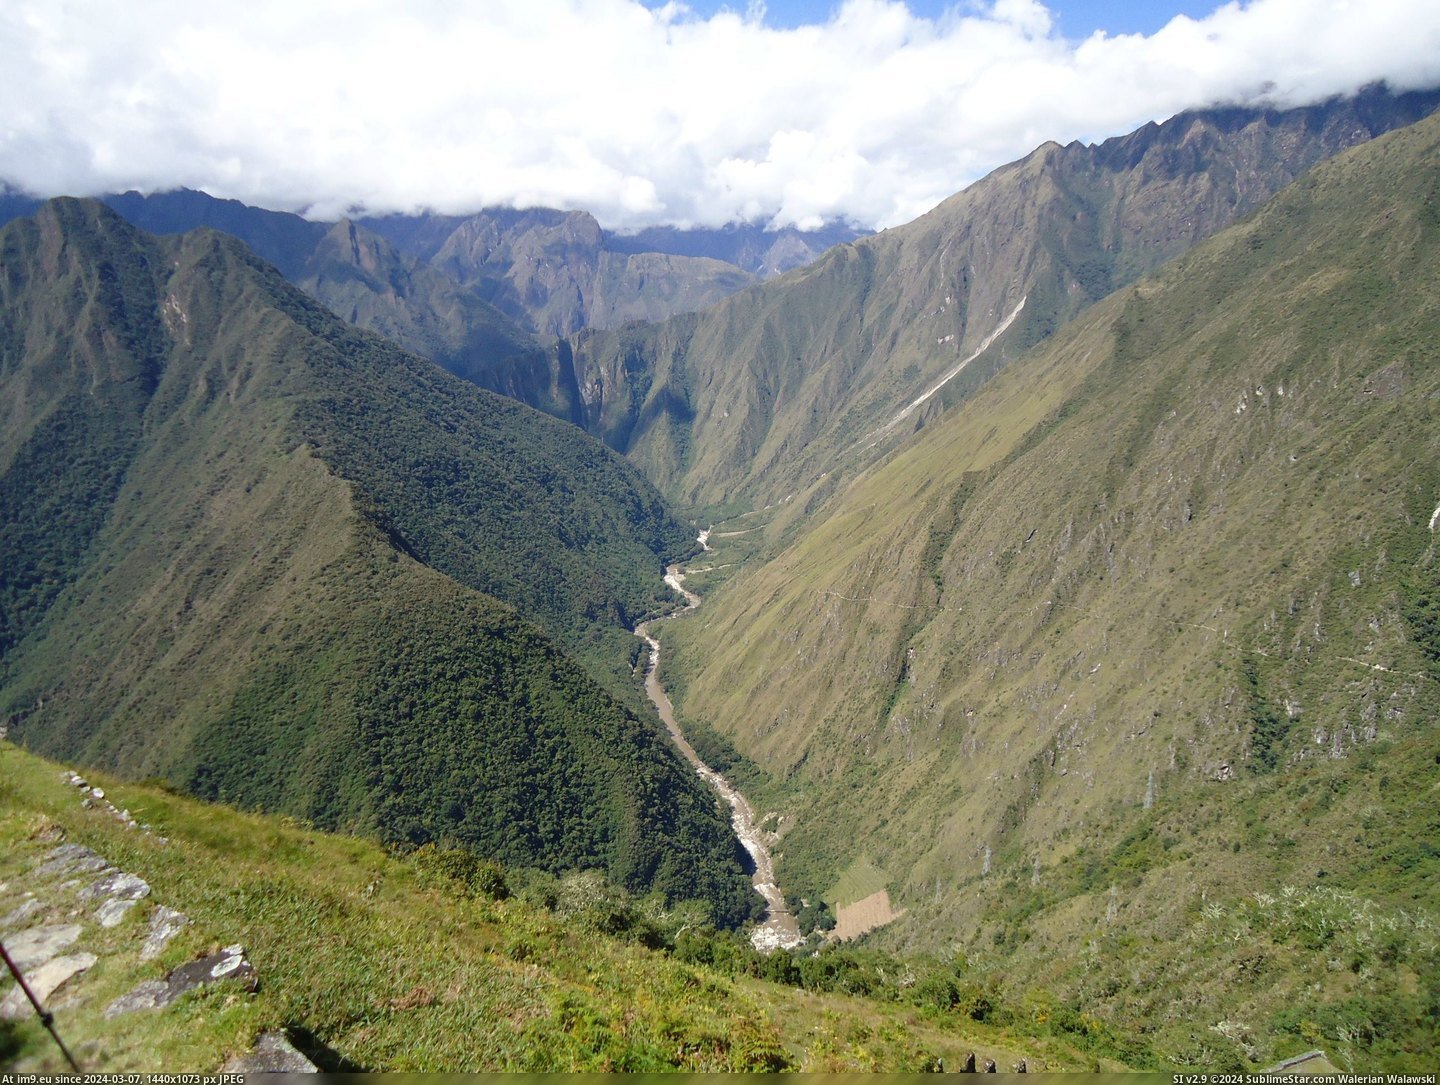 #Trail #Simply #2592x1944 #Picchu #Machu #Peru #Breathtaking #Hiked [Earthporn] I've also hiked the Inca Trail to Machu Picchu in Peru - the views are simply breathtaking [2592x1944] Pic. (Bild von album My r/EARTHPORN favs))